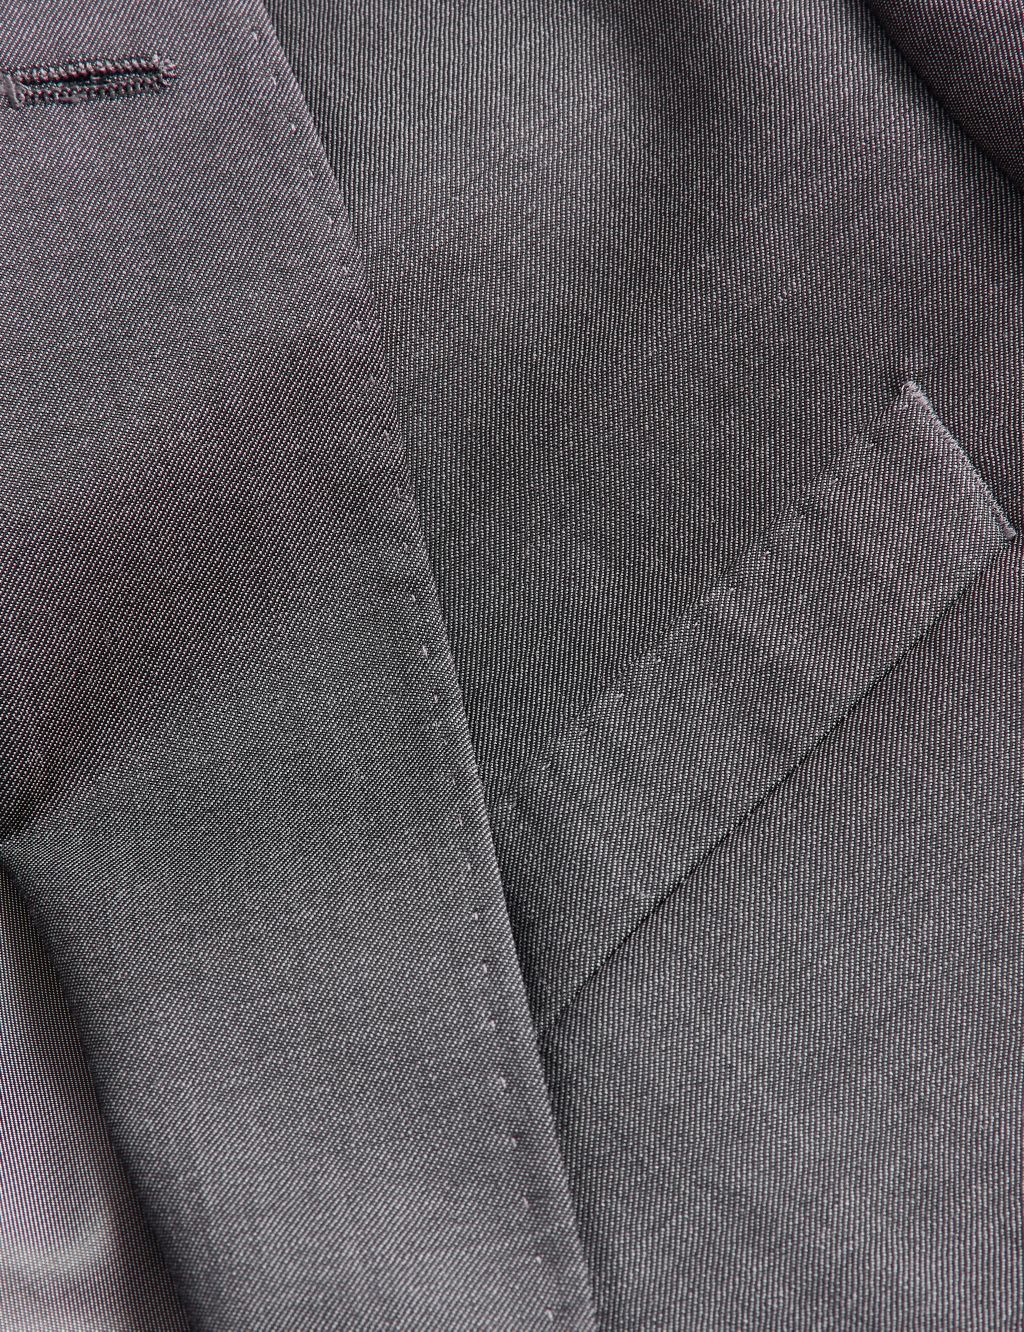 Tailored Fit Pure Wool Twill Suit Jacket image 8